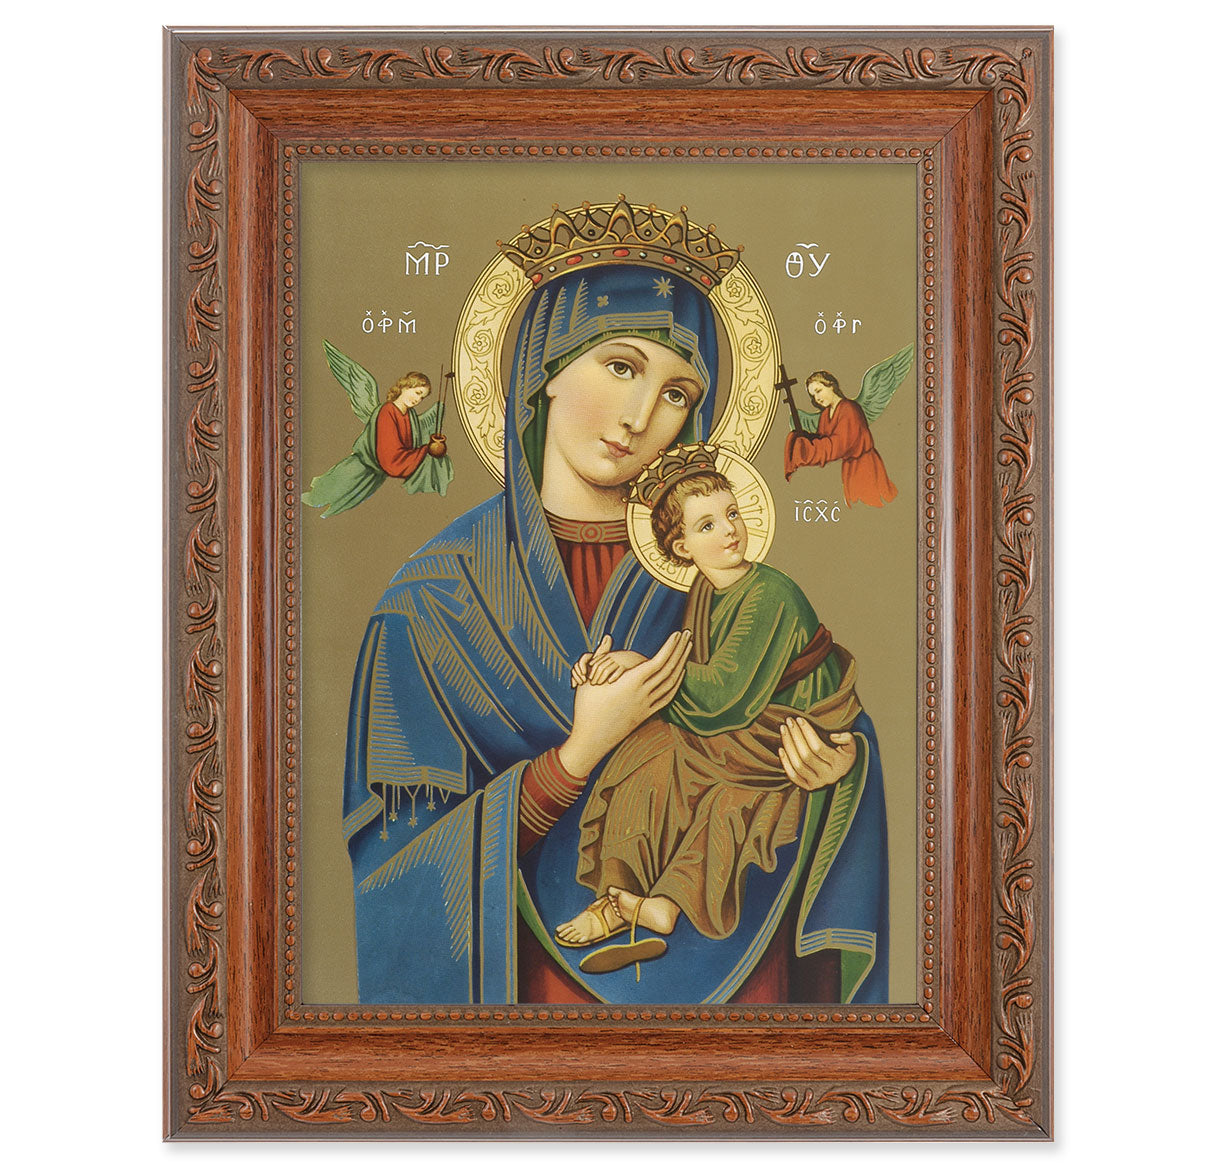 Our Lady of Perpetual Help Mahogany Finish Framed Art